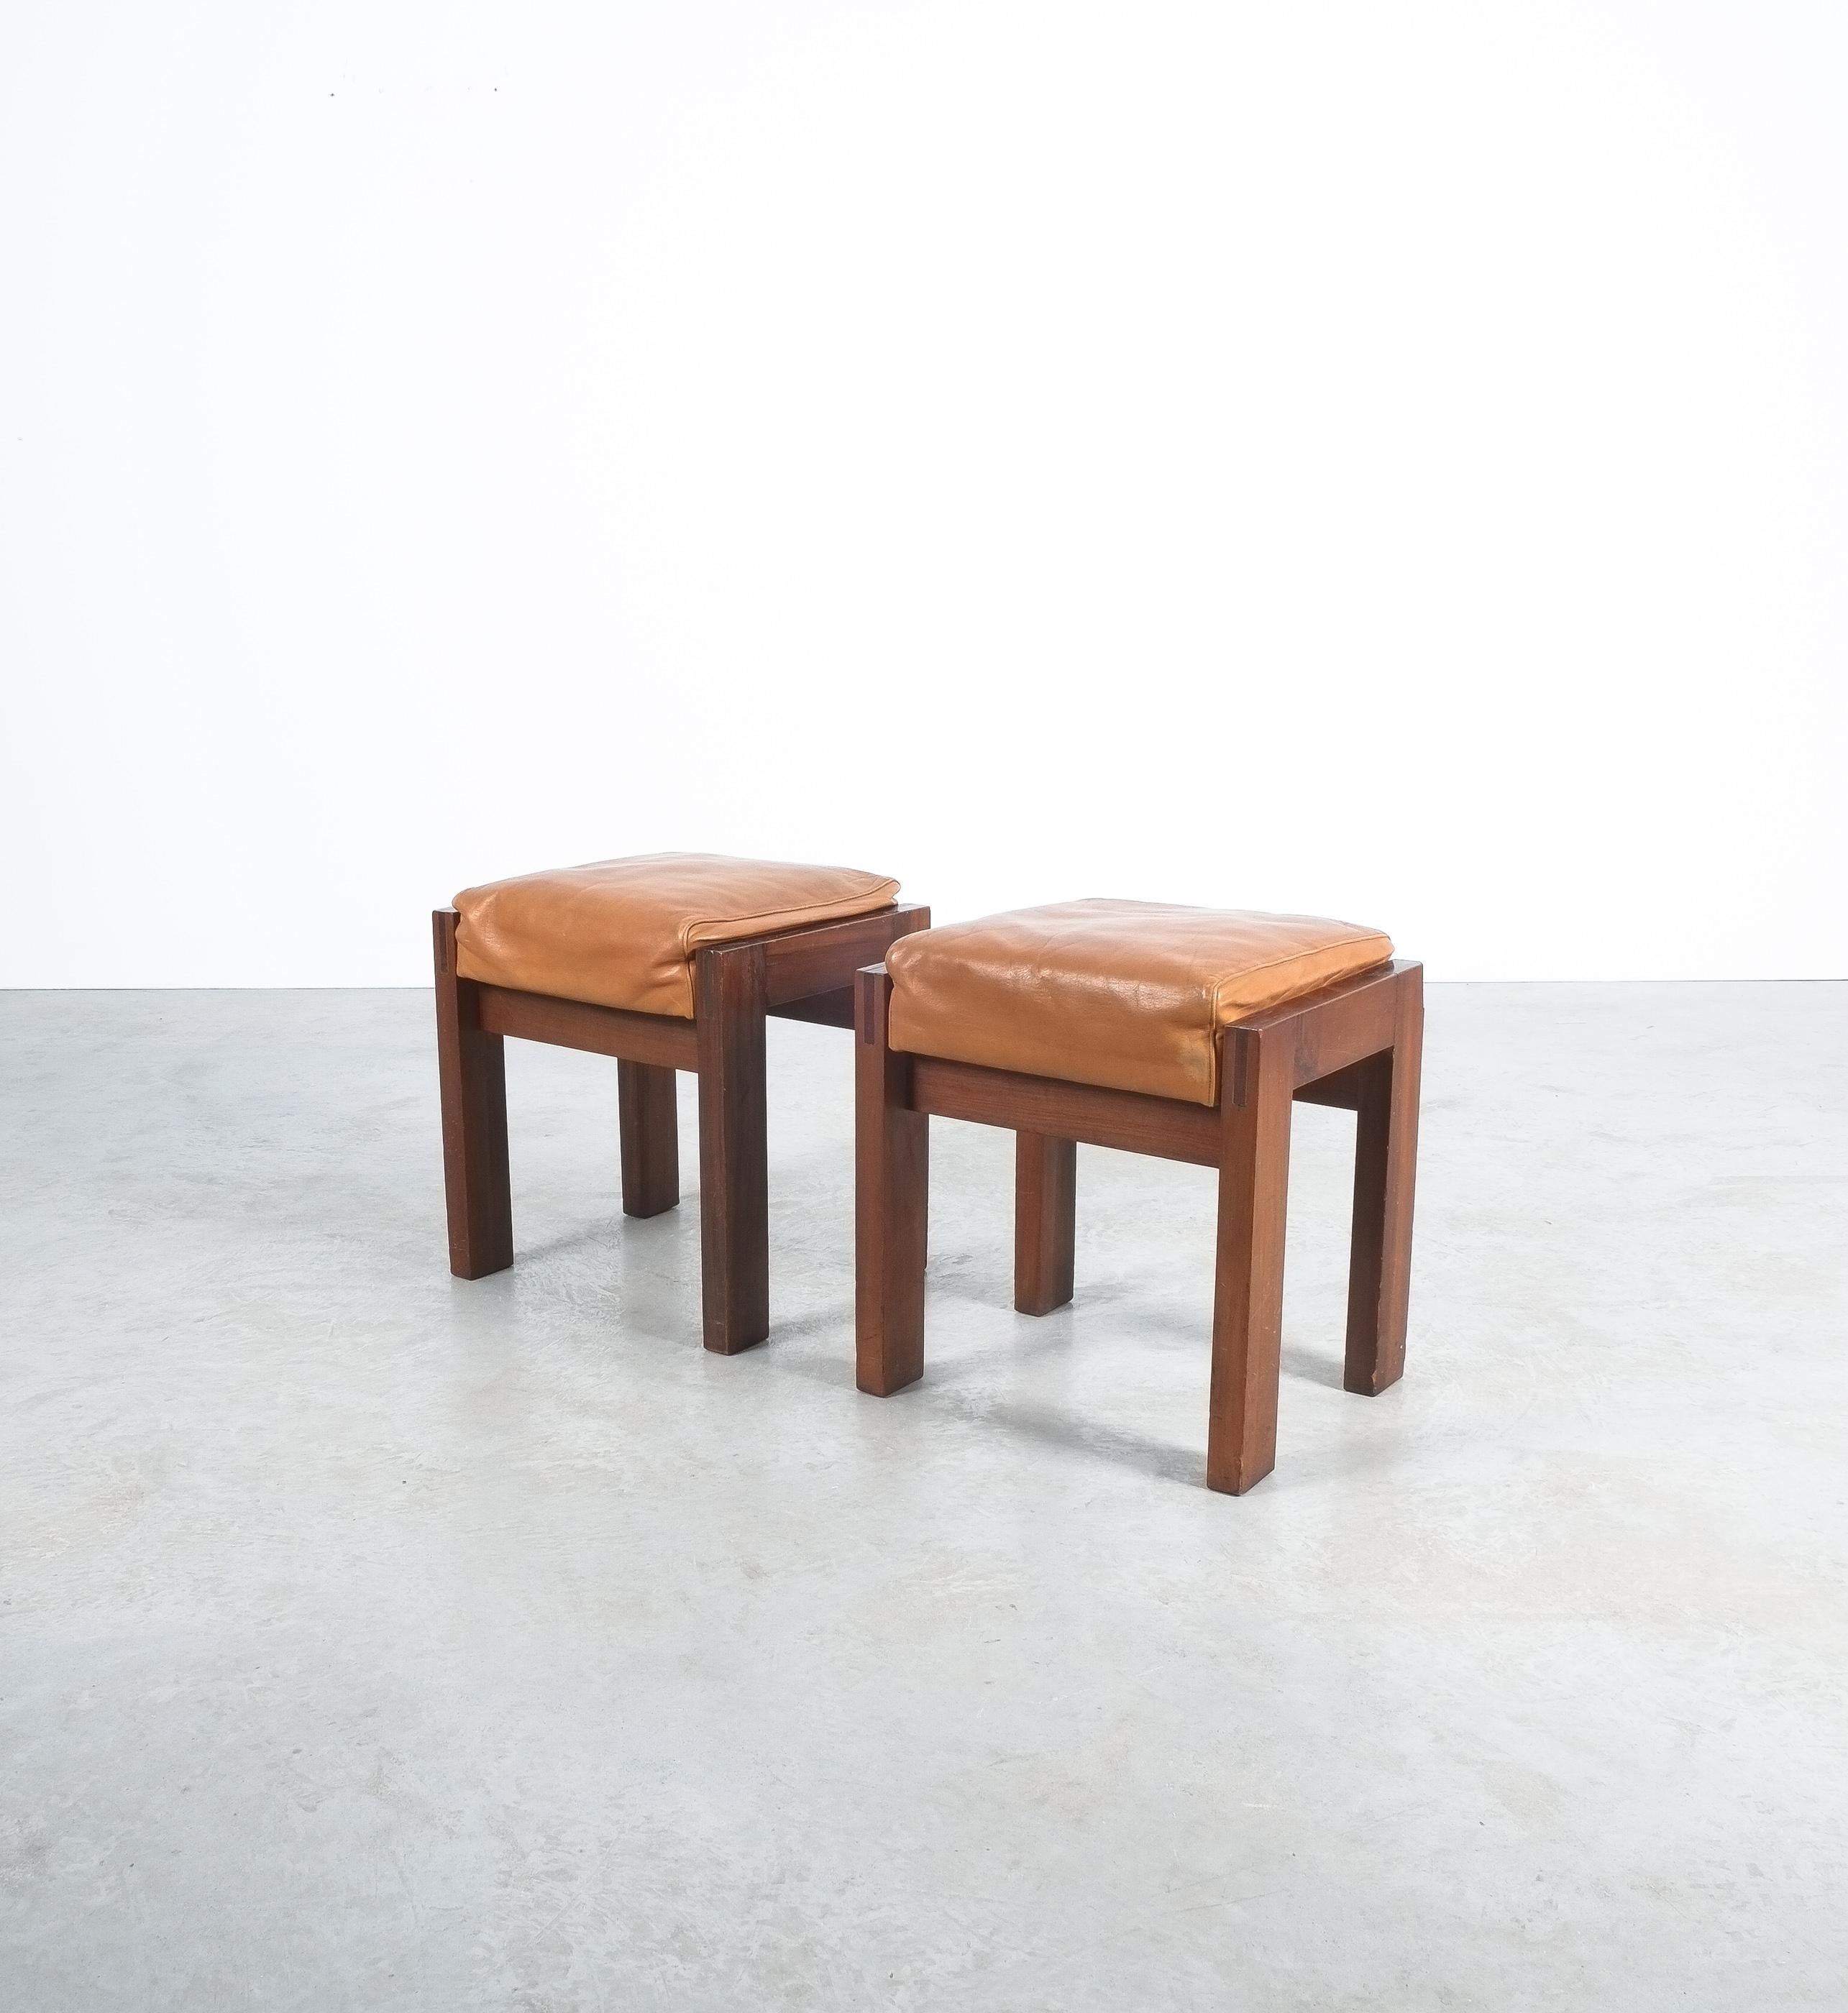 Mid-20th Century Maple and Leather Midcentury Wood Stools, Italy, 1950 For Sale